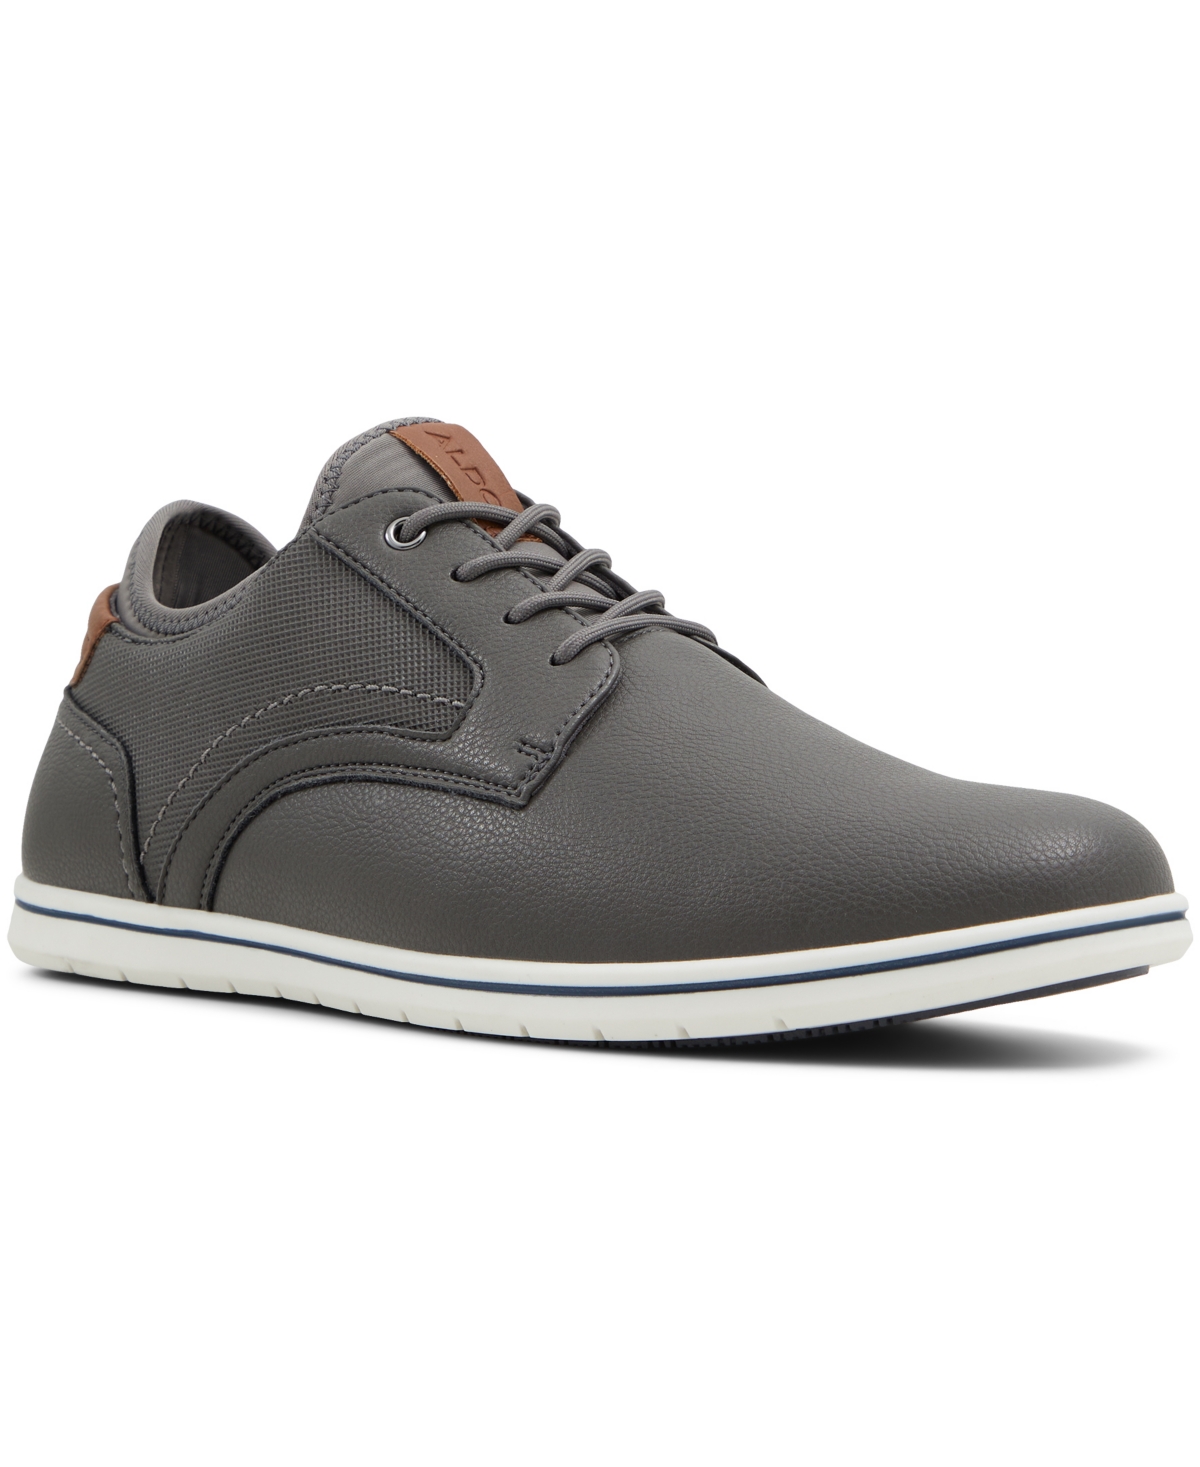 Men's Carnaby Casual Lace Up Sneaker - Grey